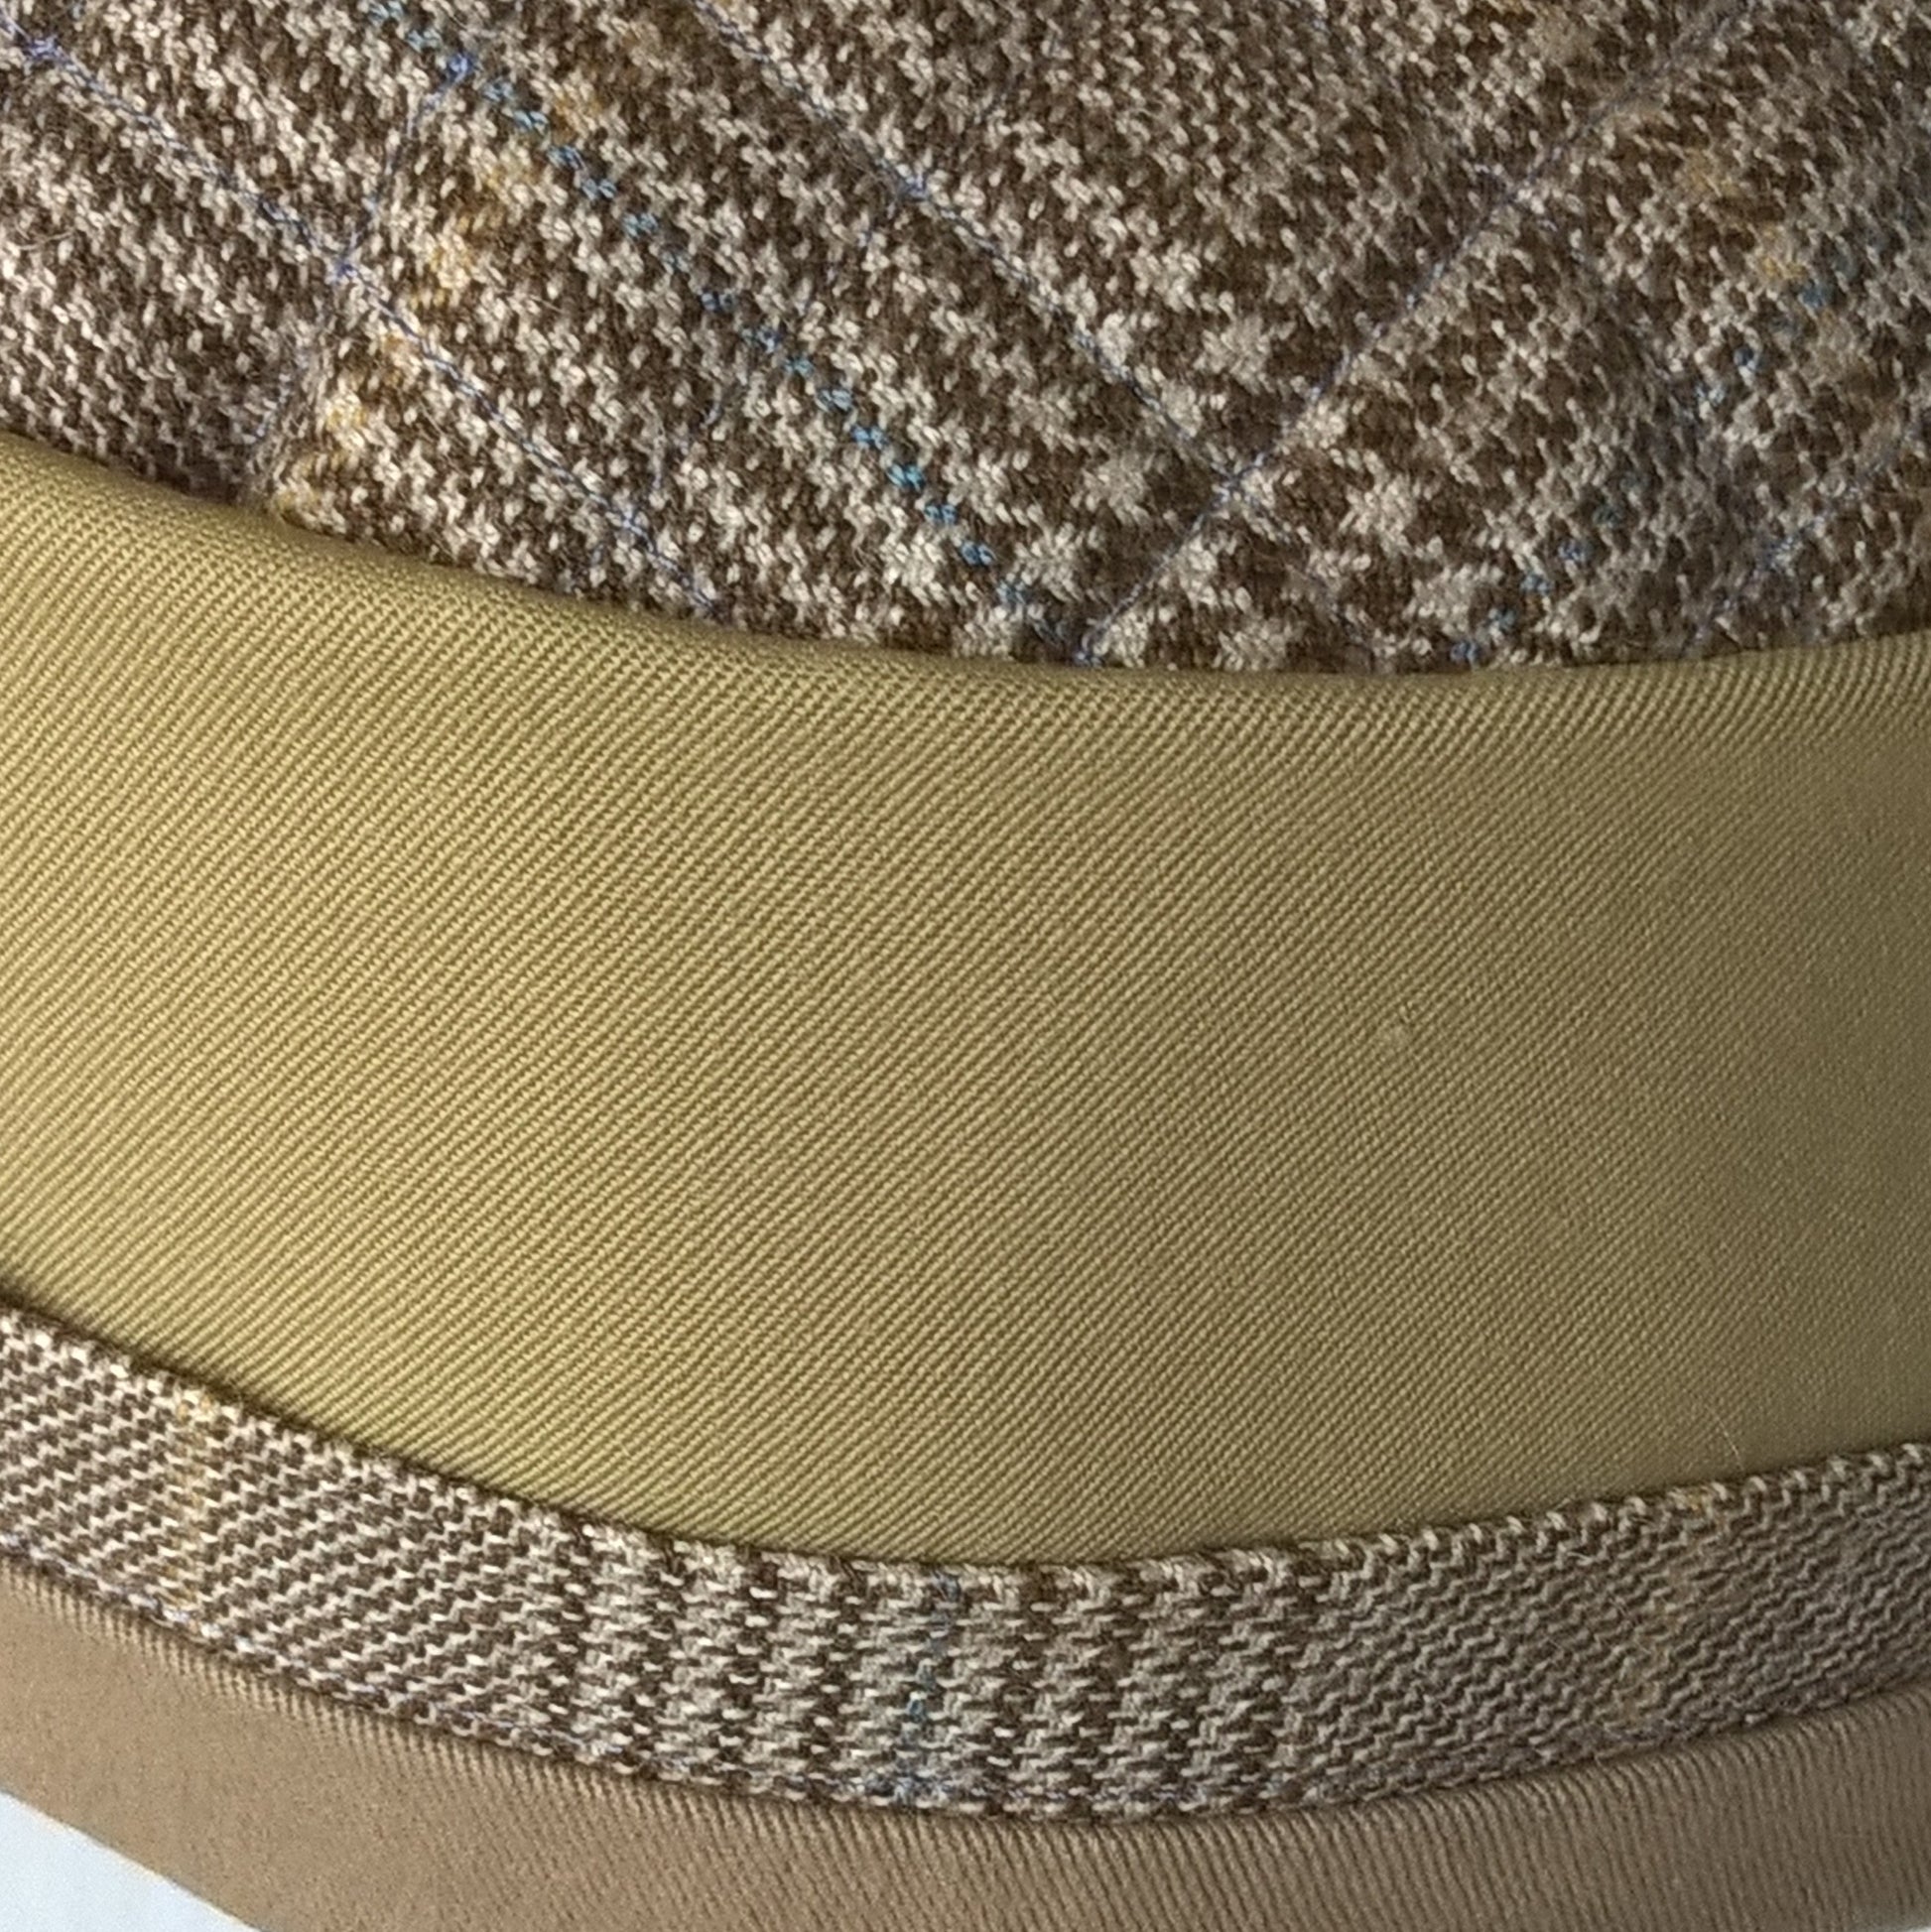 Breathable wool and cotton smoking cap in tweed, mustard, and taupe